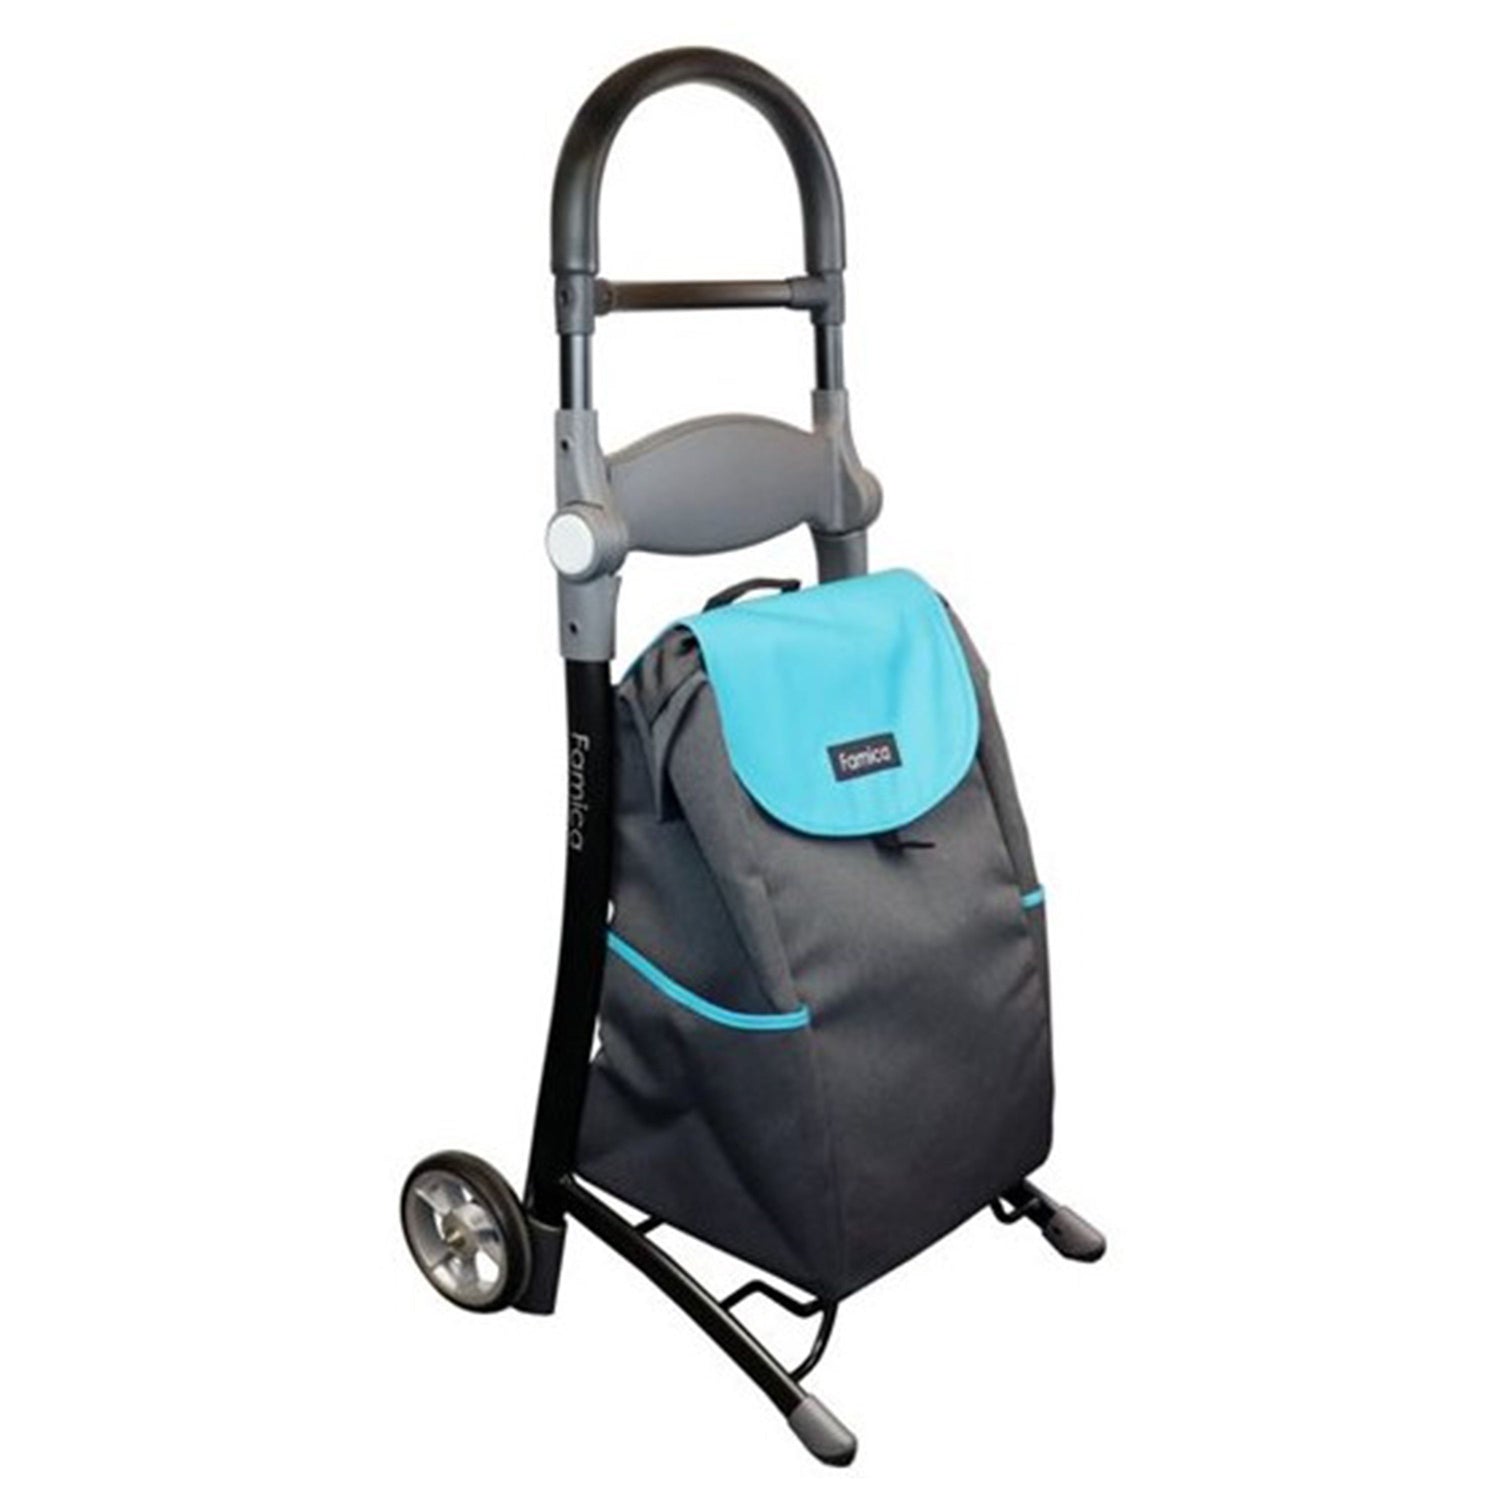 Koala Shopping trolley with seating function